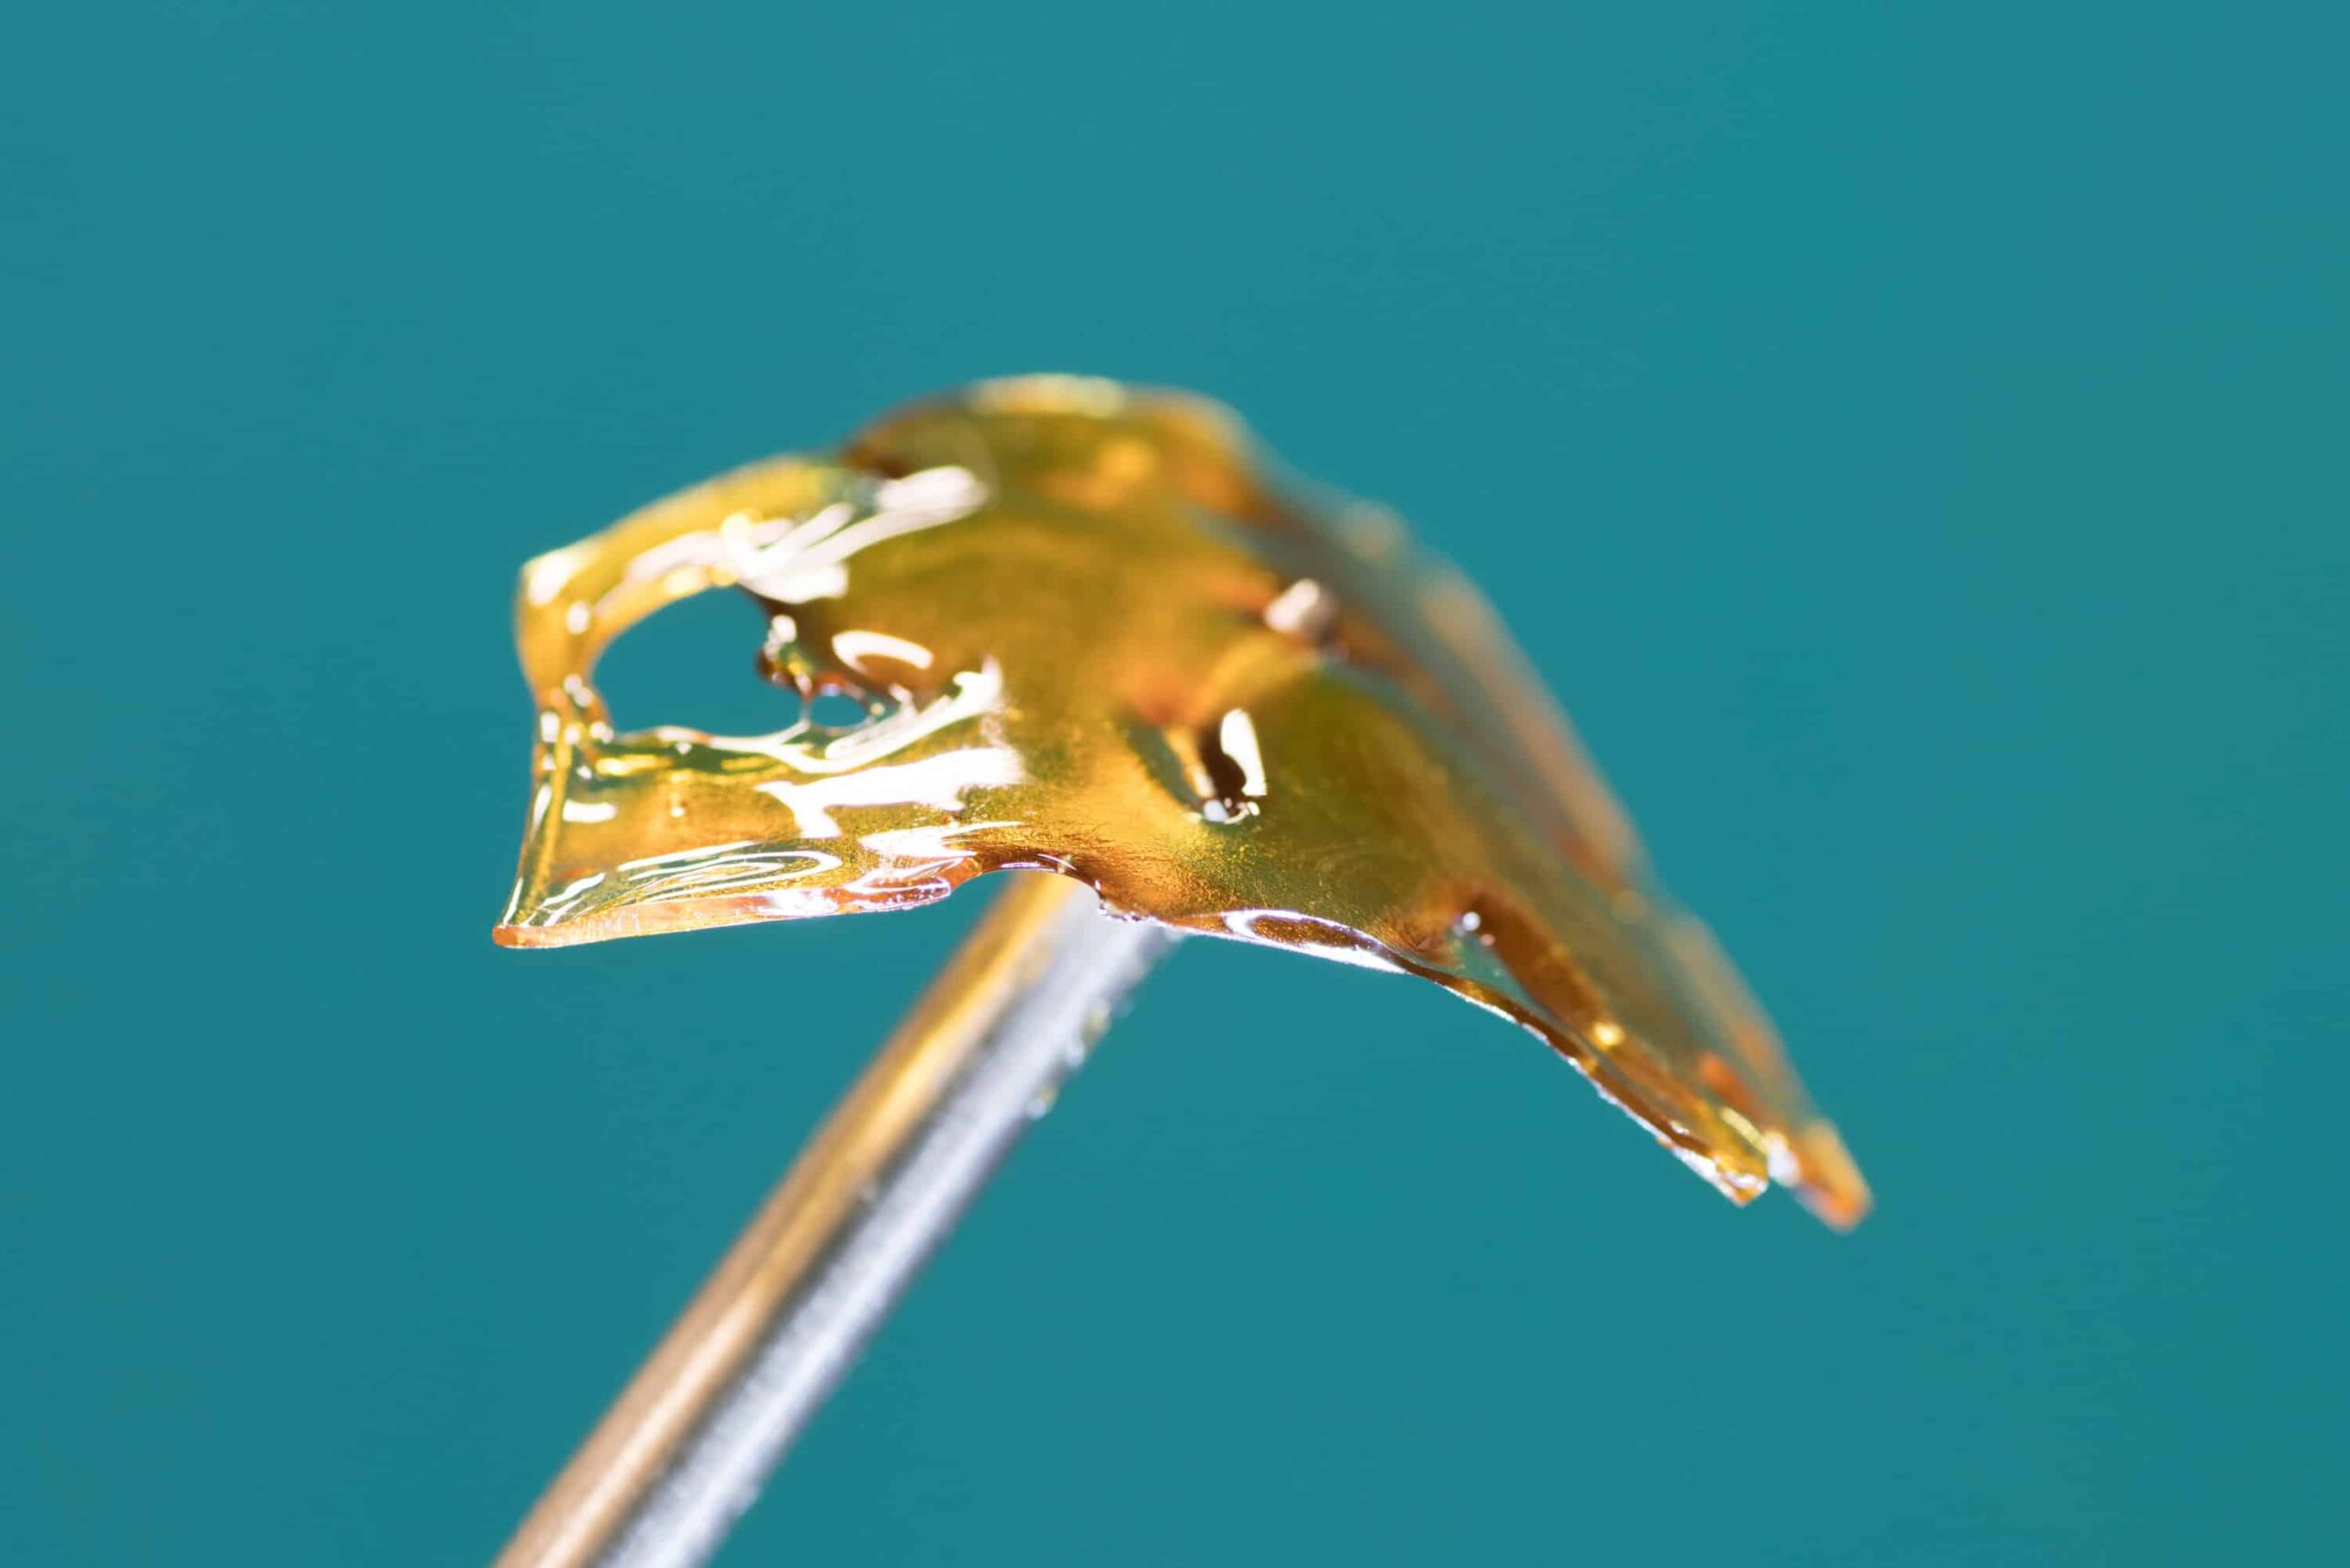 A large slab of cannabis shatter ready for dabbing